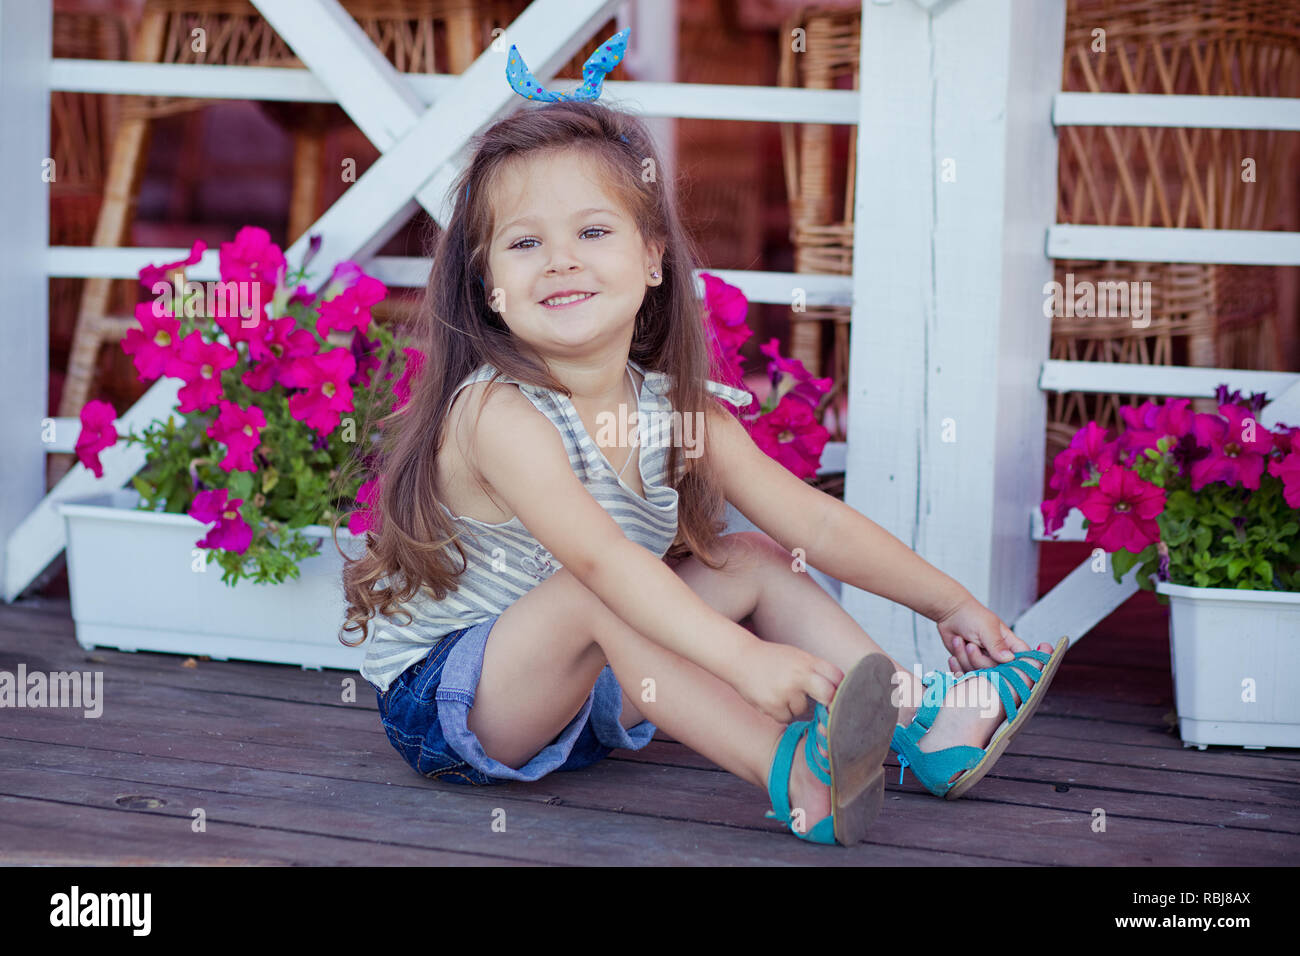 Stylish beautifull cute baby girl with brunette hair posing on ...